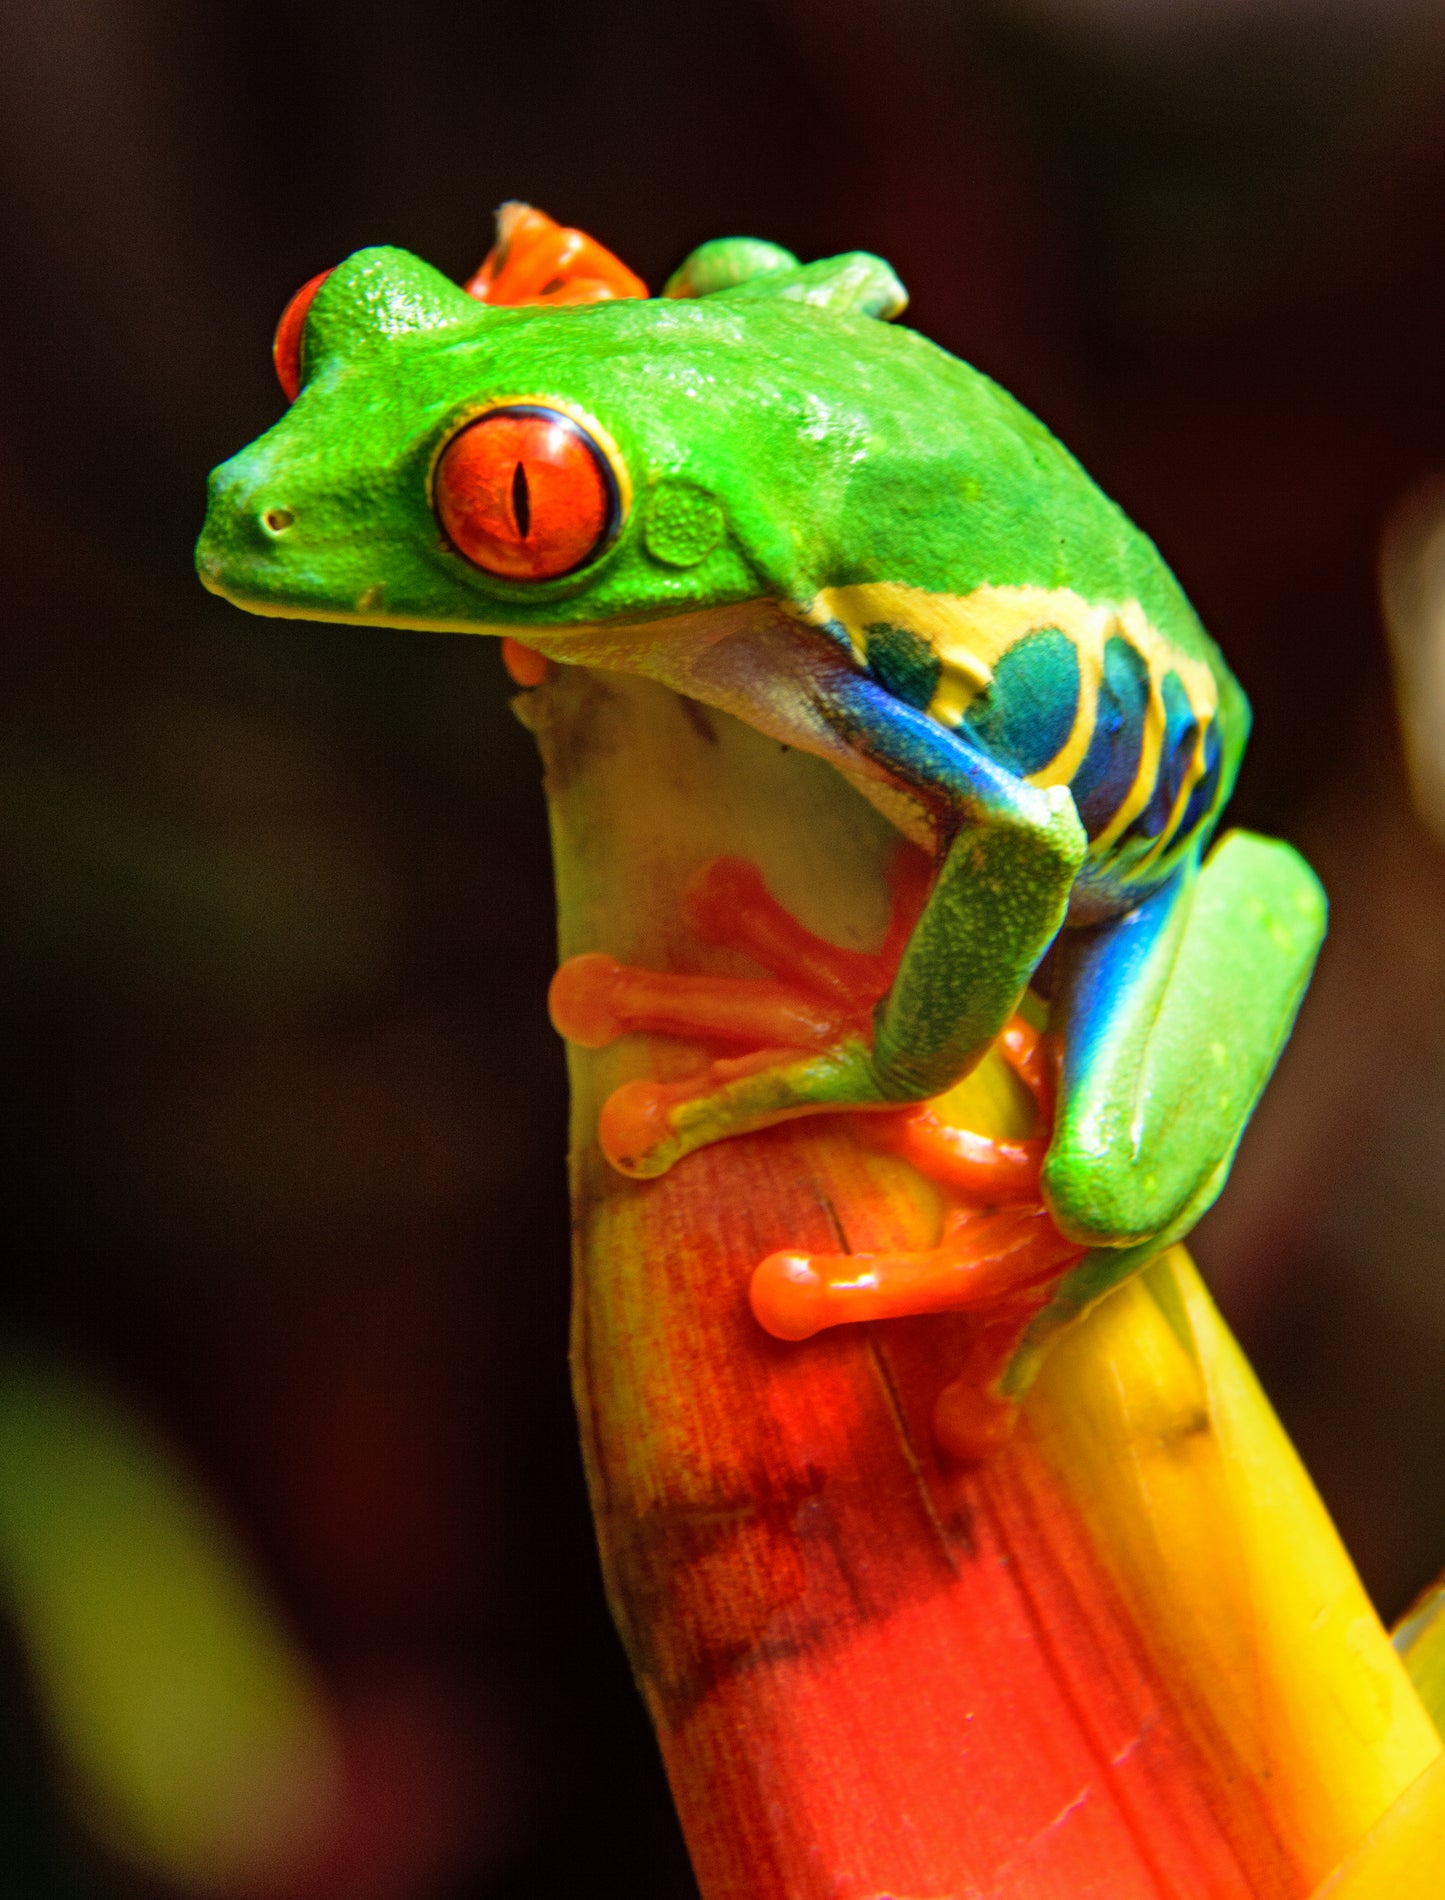 Red Eyed Tree Frog, Costa Rica